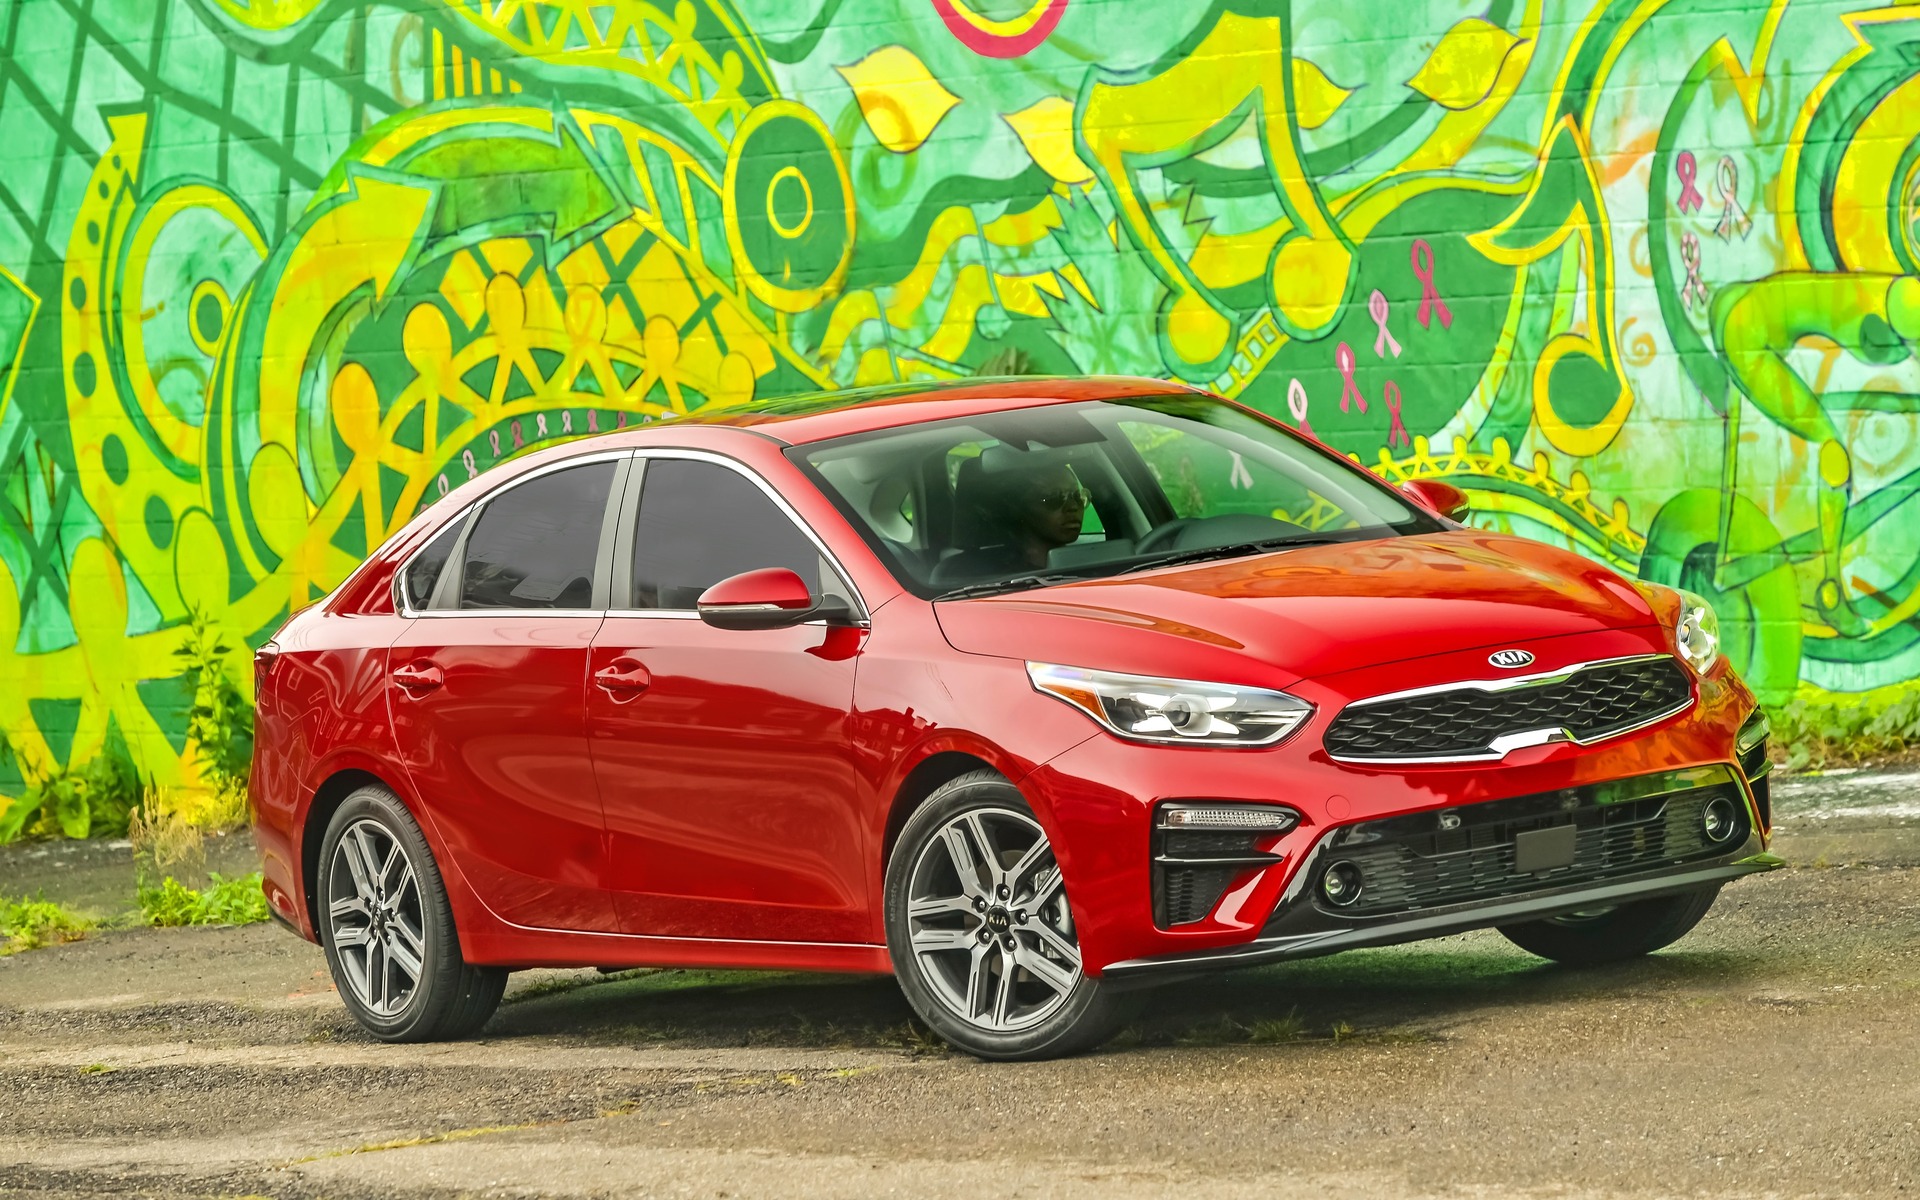 <p>2019 Kia Forte, Best Small Car in Canada according to AJAC.</p>